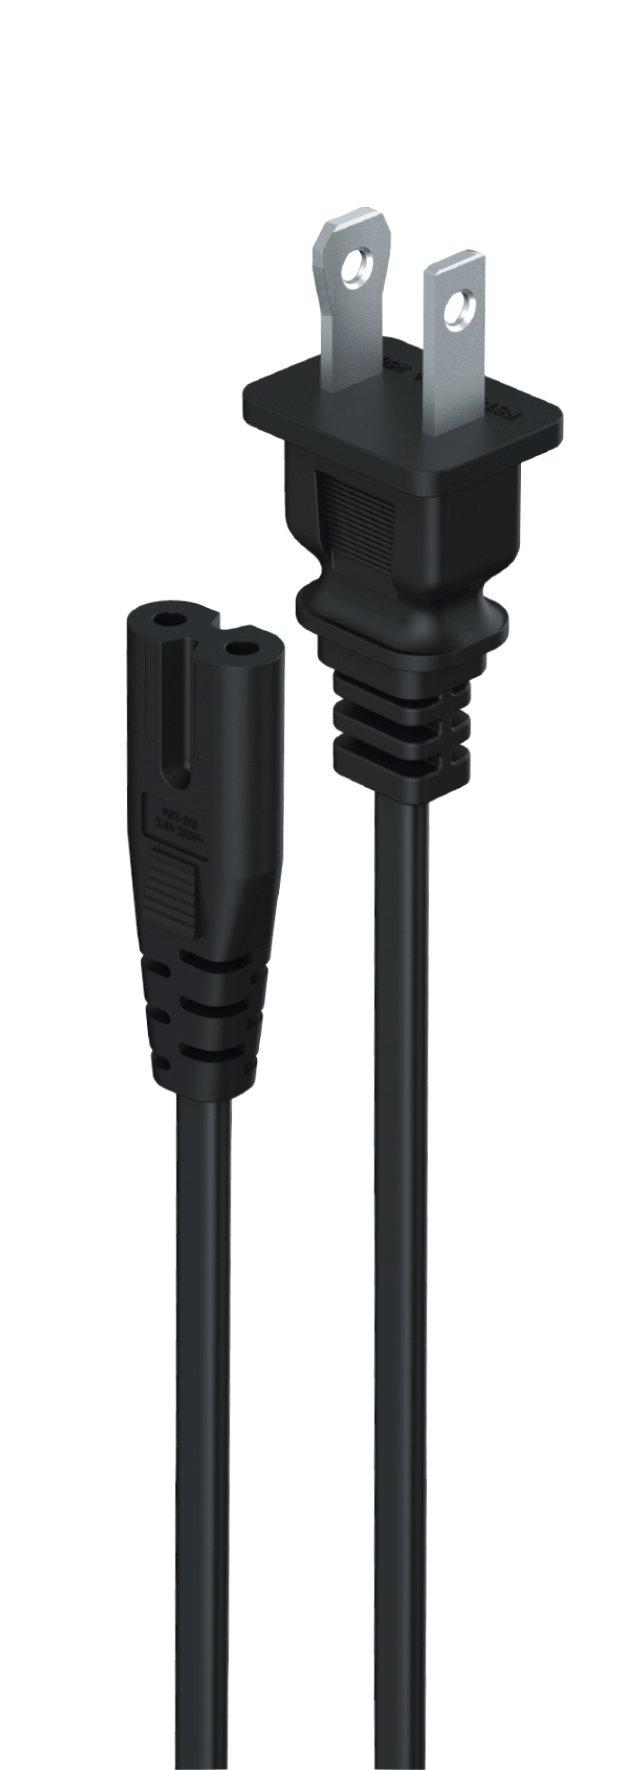 https://media.gamestop.com/i/gamestop/11204301/GameStop-Universal-6ft-AC-Power-Cord-for-PlayStation-4-PlayStation-5-Xbox-One-and-Xbox-Series-X